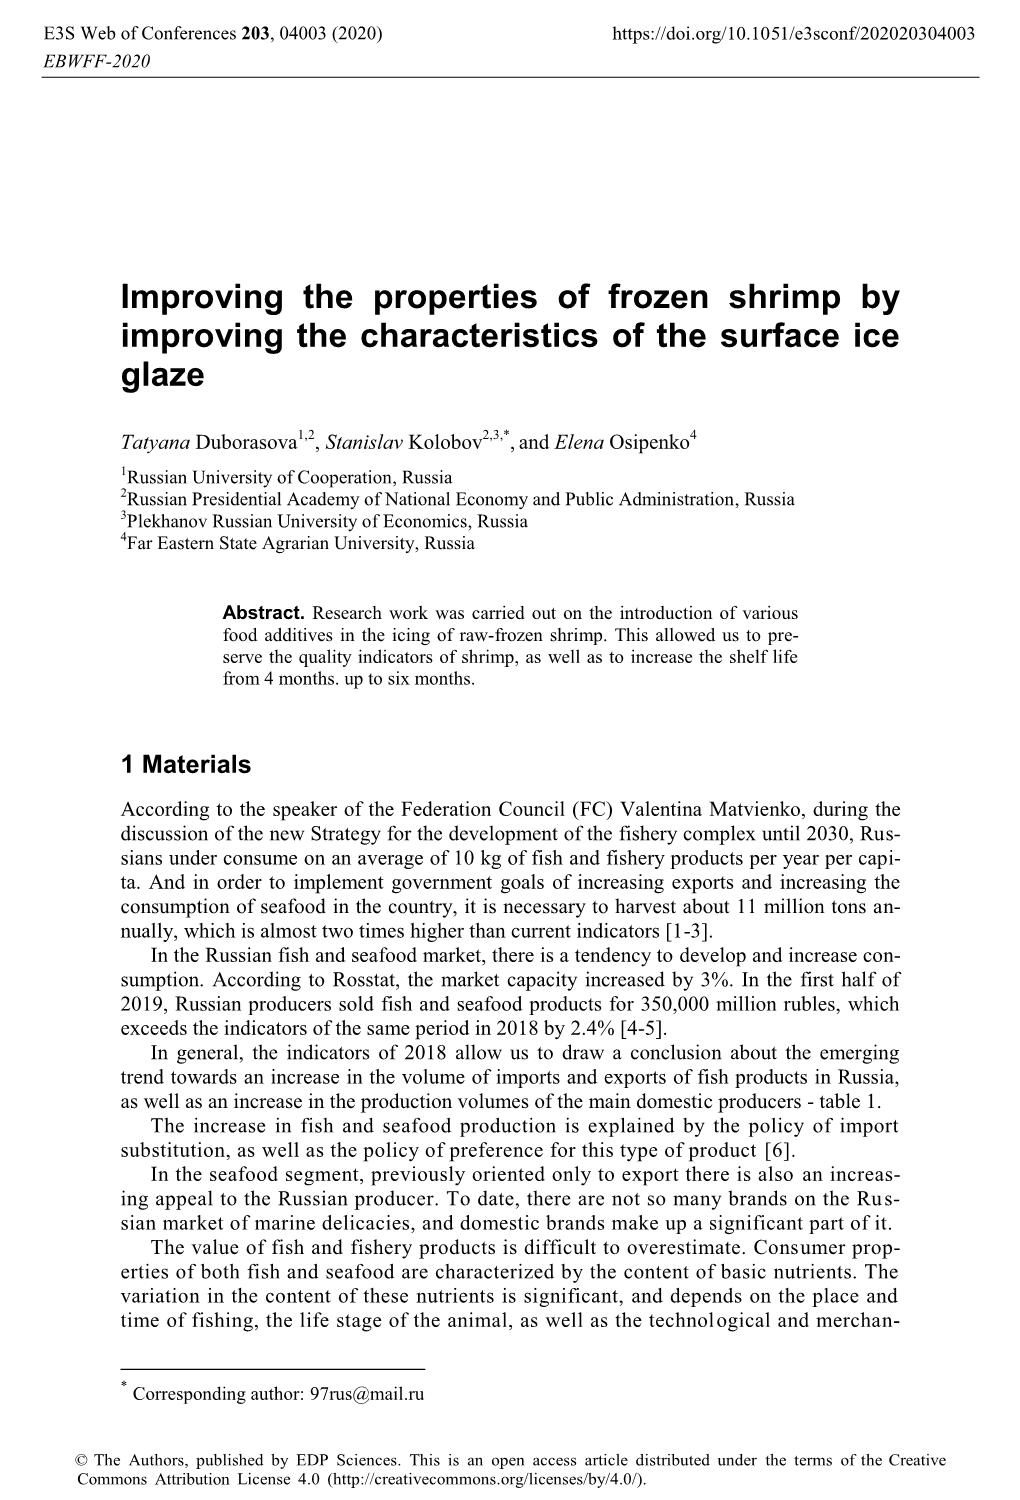 Improving the Properties of Frozen Shrimp by Improving the Characteristics of the Surface Ice Glaze